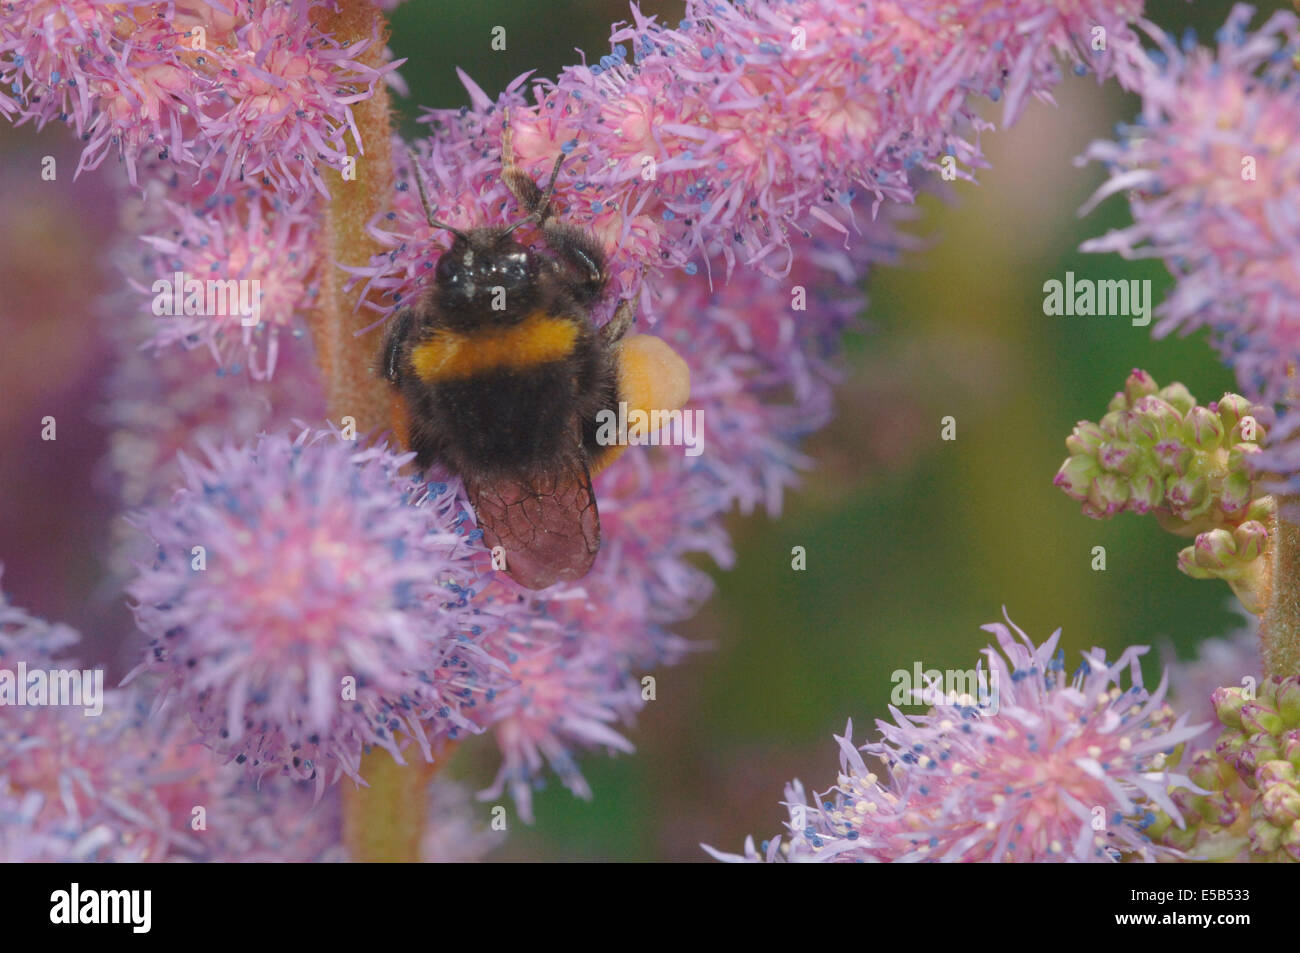 Buff-Tailed Bumble Bee (Bombus terrestris) On Astilbe Flowers Stock Photo